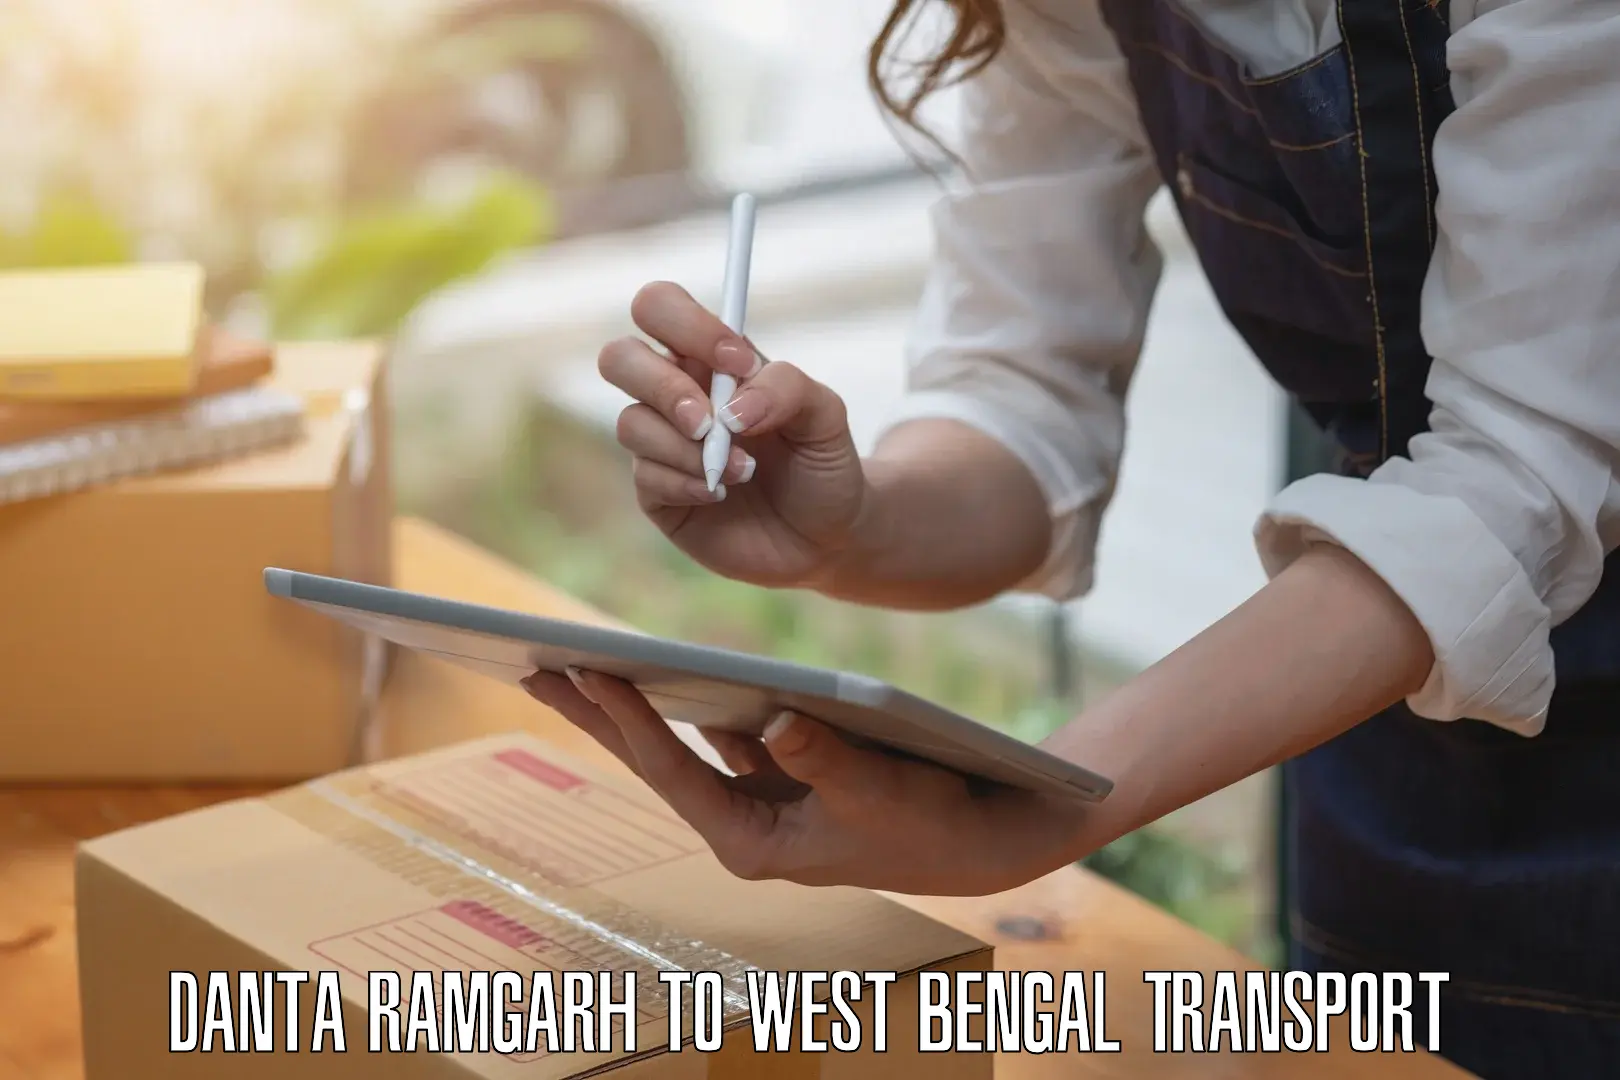 Transport shared services Danta Ramgarh to Hooghly